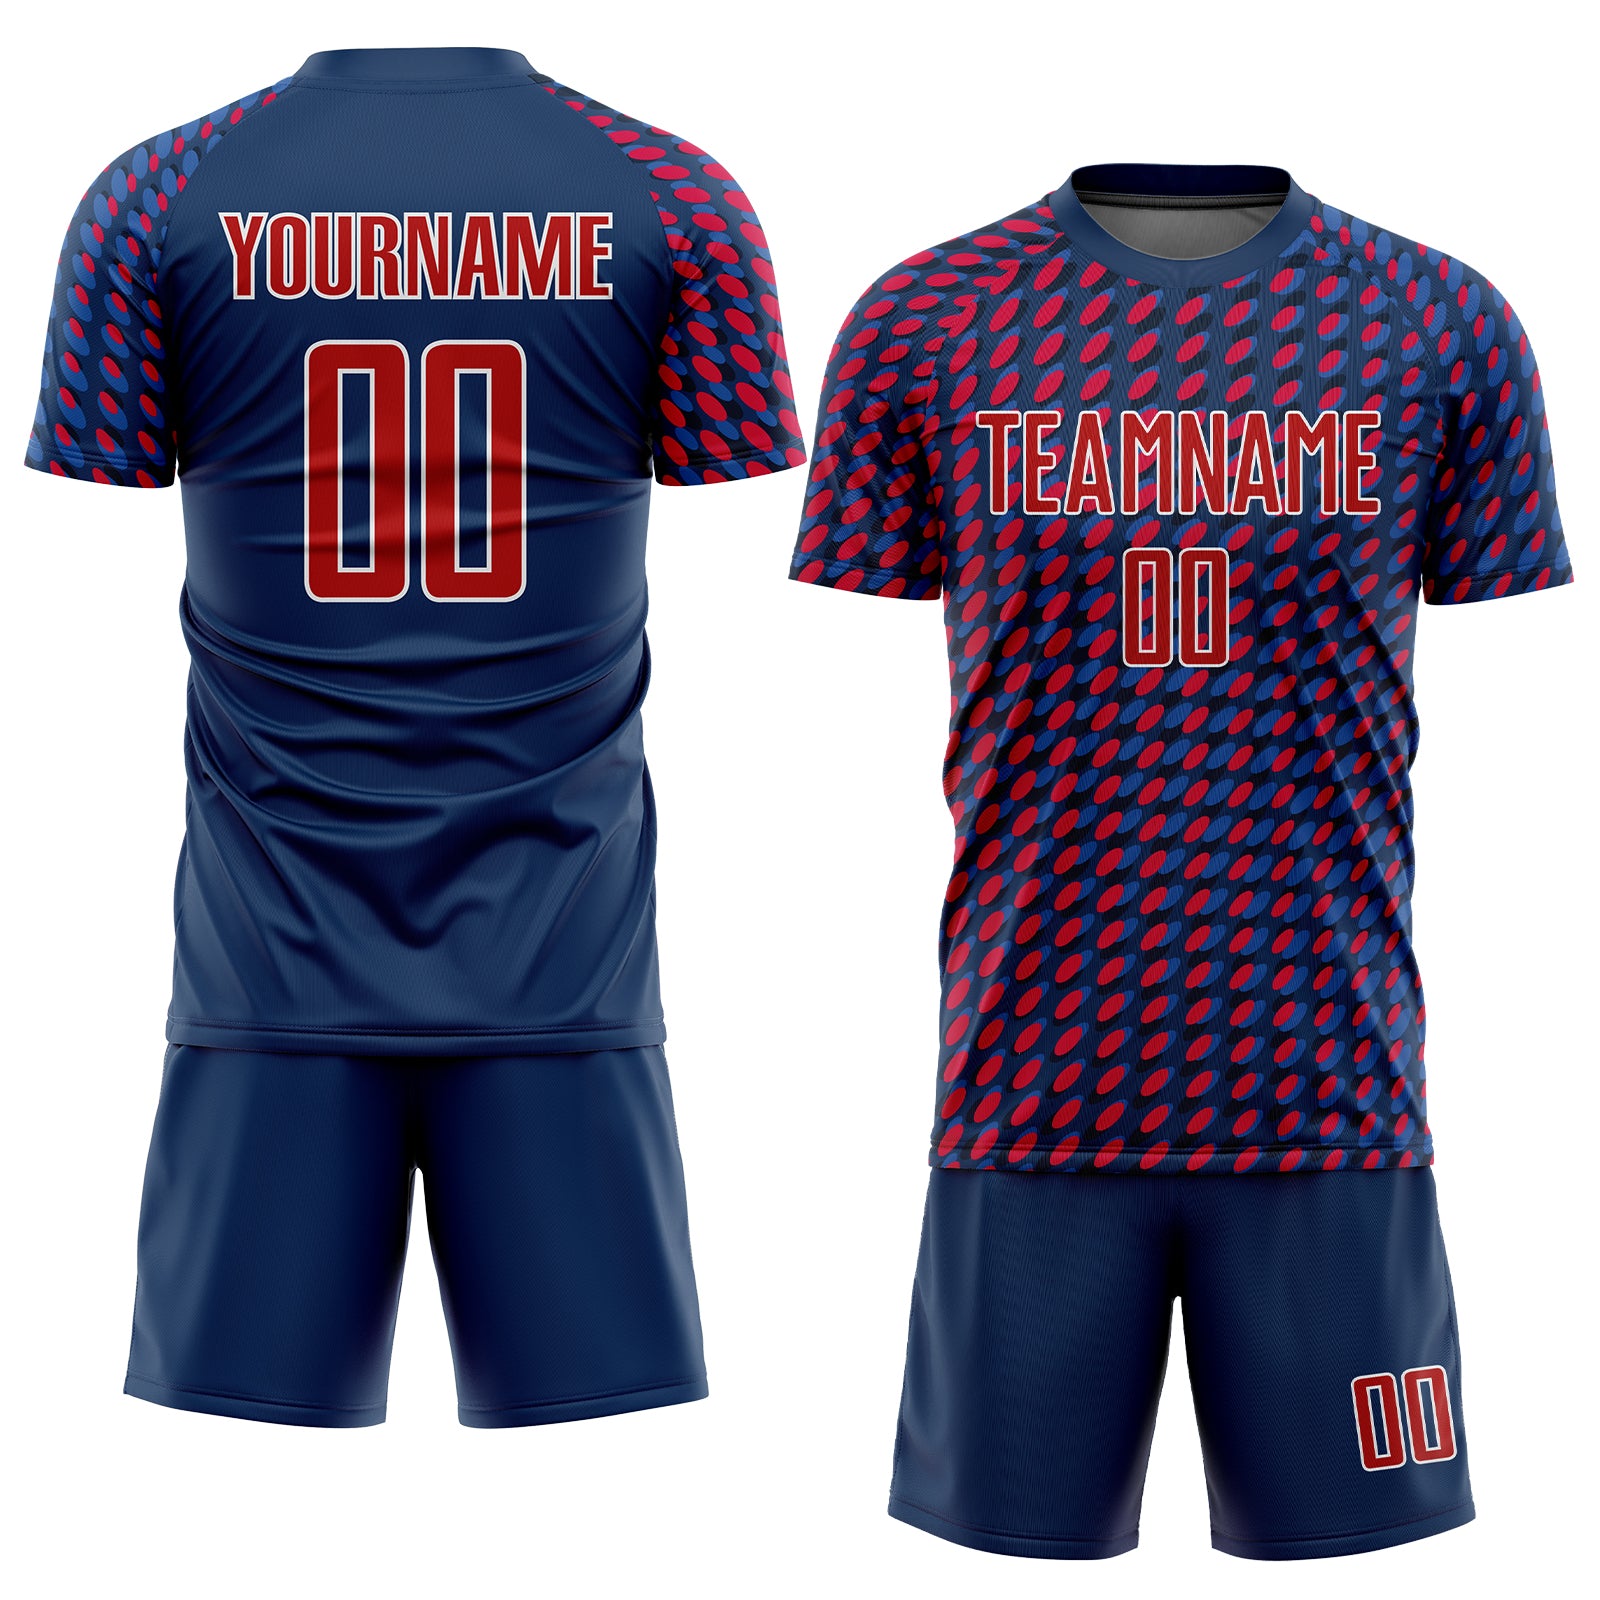 Custom Navy Red-White Sublimation Soccer Uniform Jersey Fast